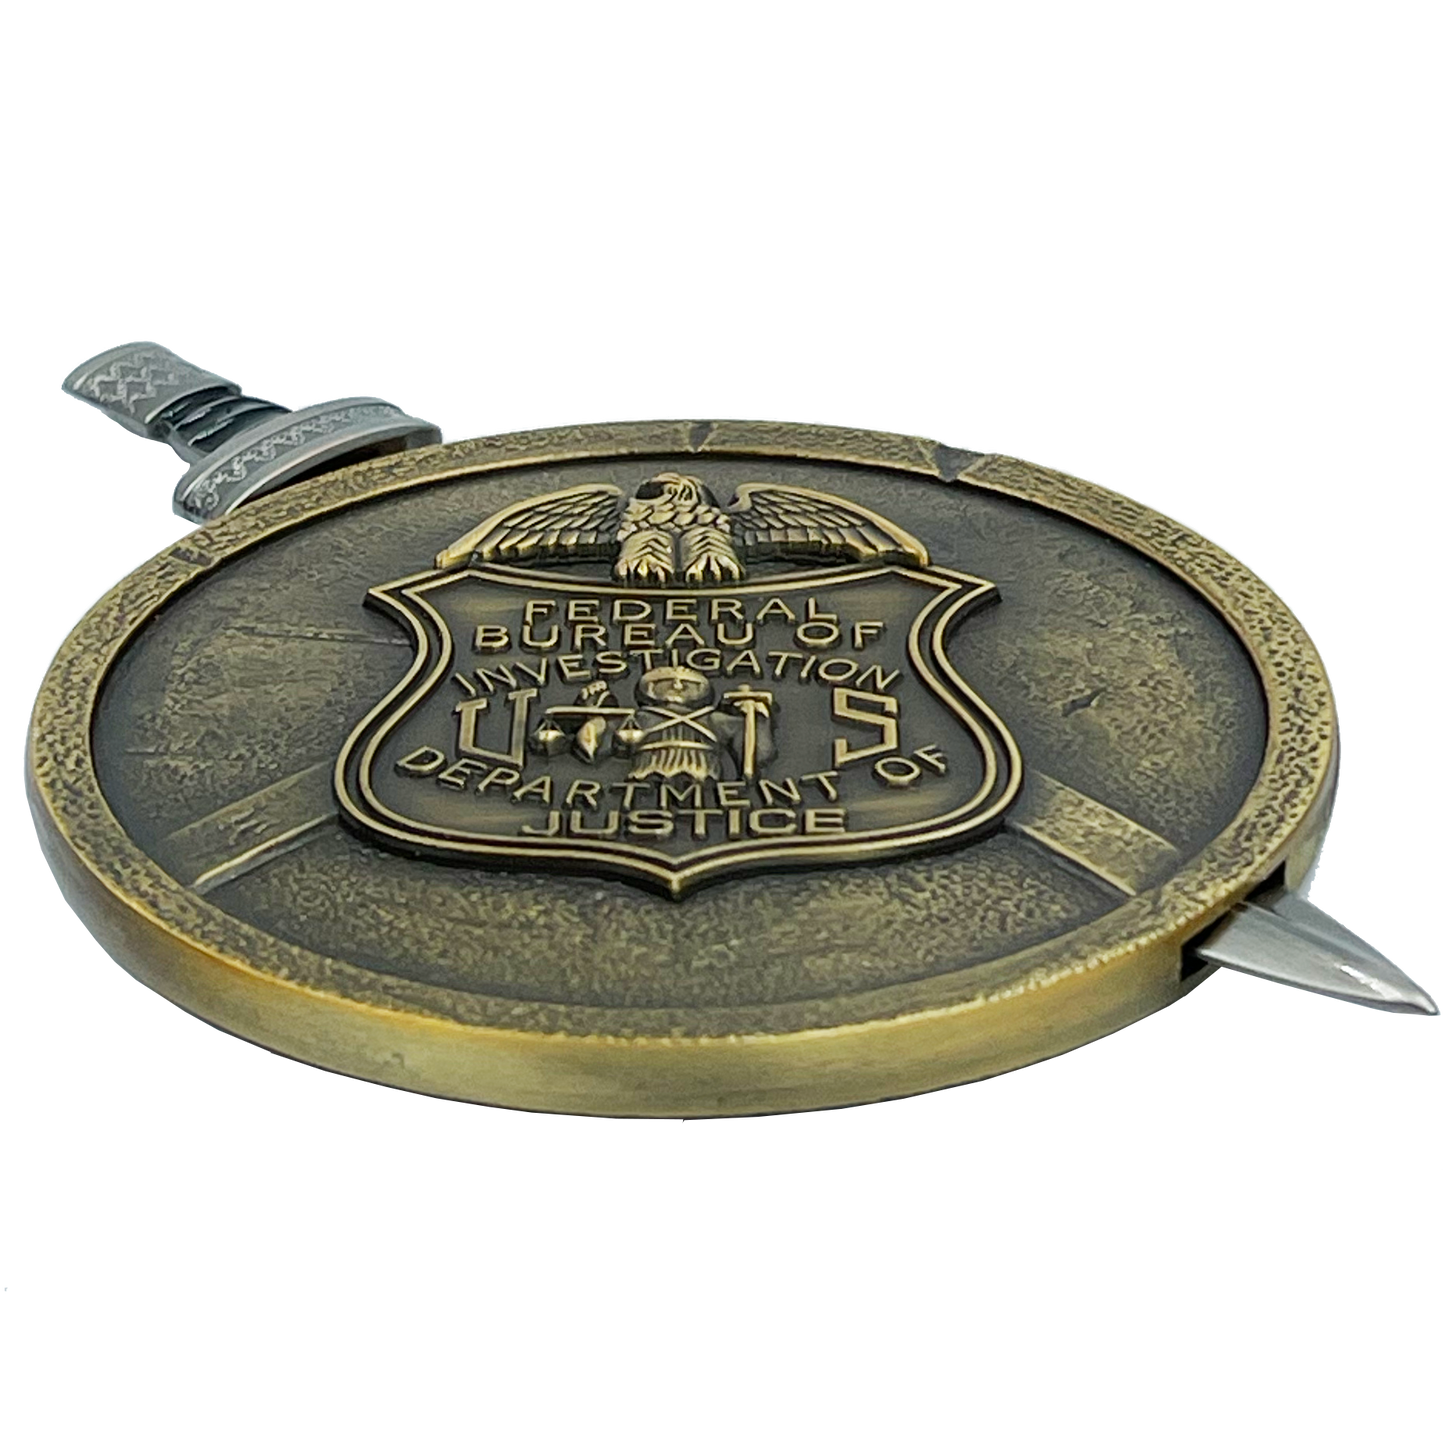 EL10-004 FBI Special Agent intel Analyst Shield with removable Sword Challenge Coin Set Federal Bureau of Investigations